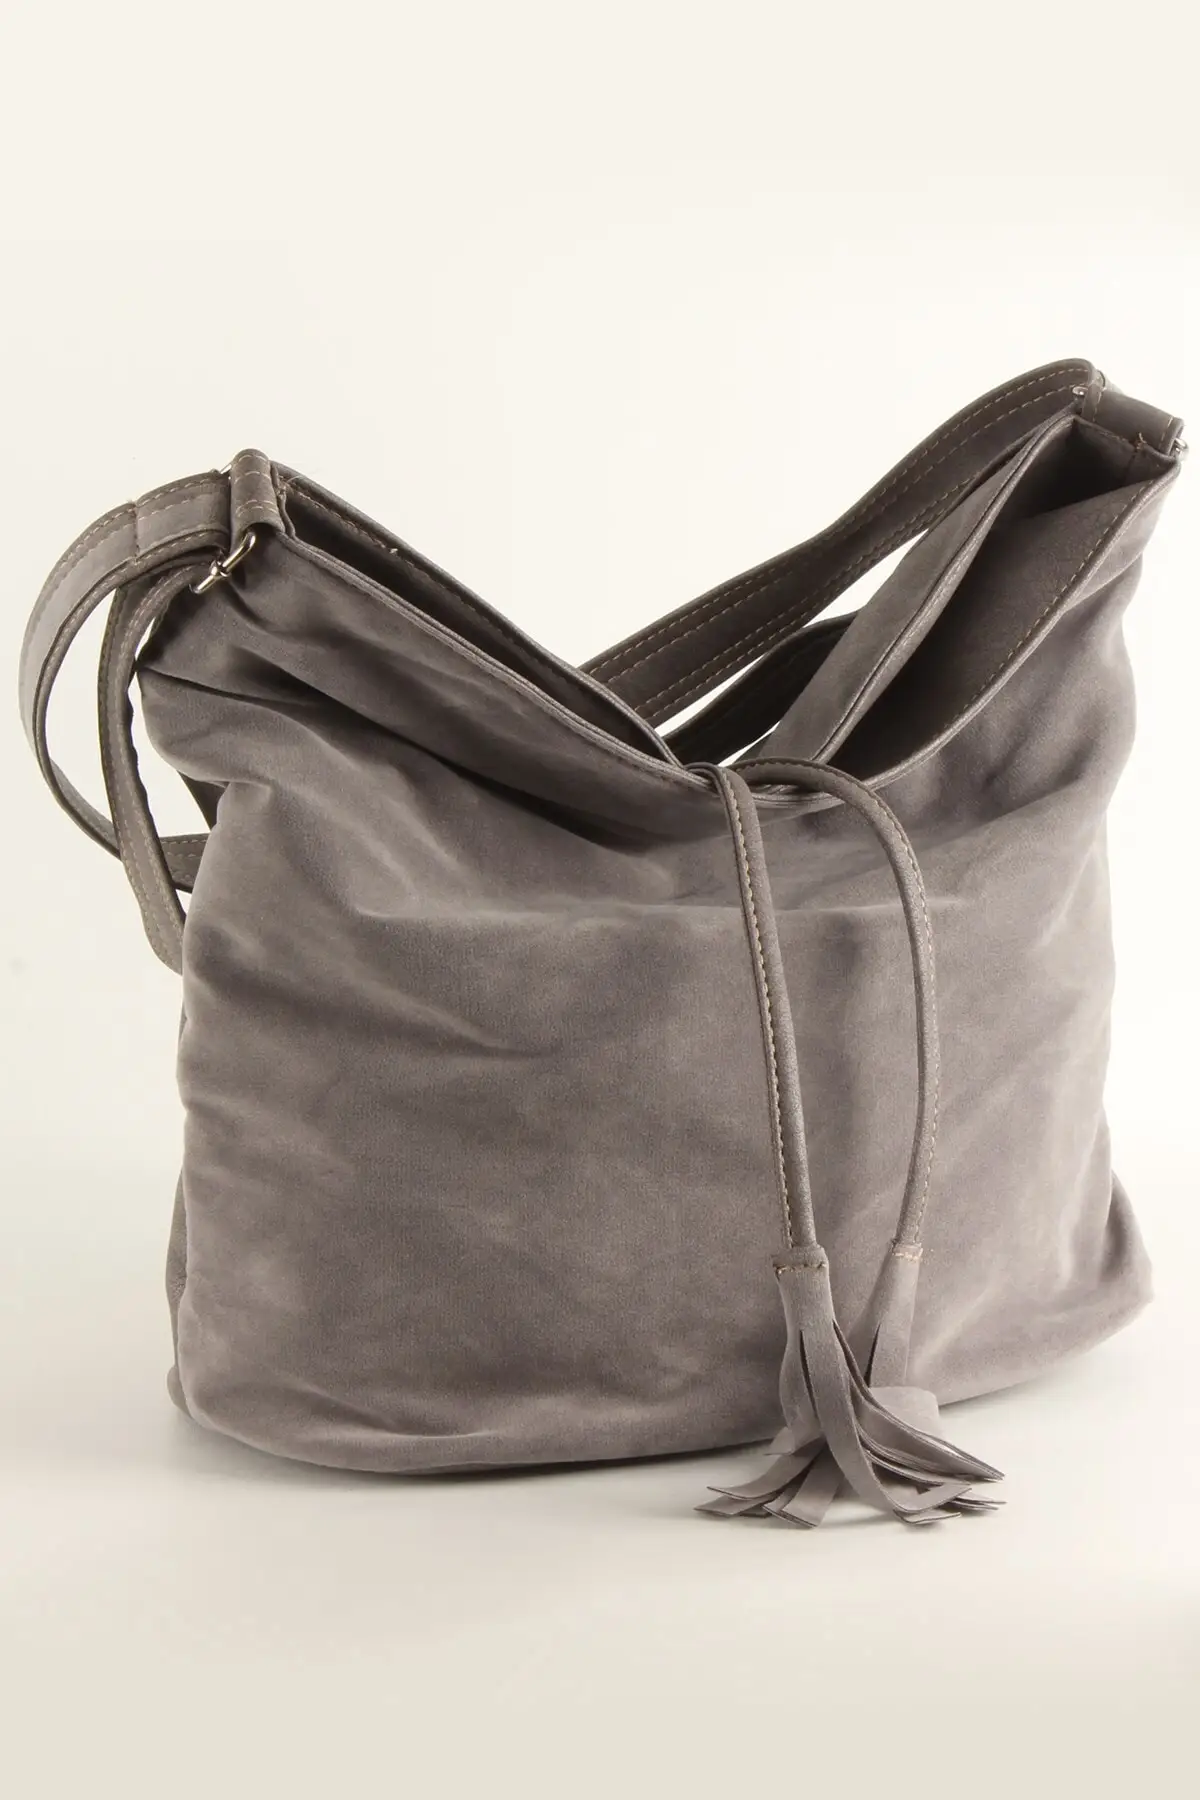 Women's Soft Double-Sided Nubuck Looking Temporary Shed Shoulder Bag (10409)